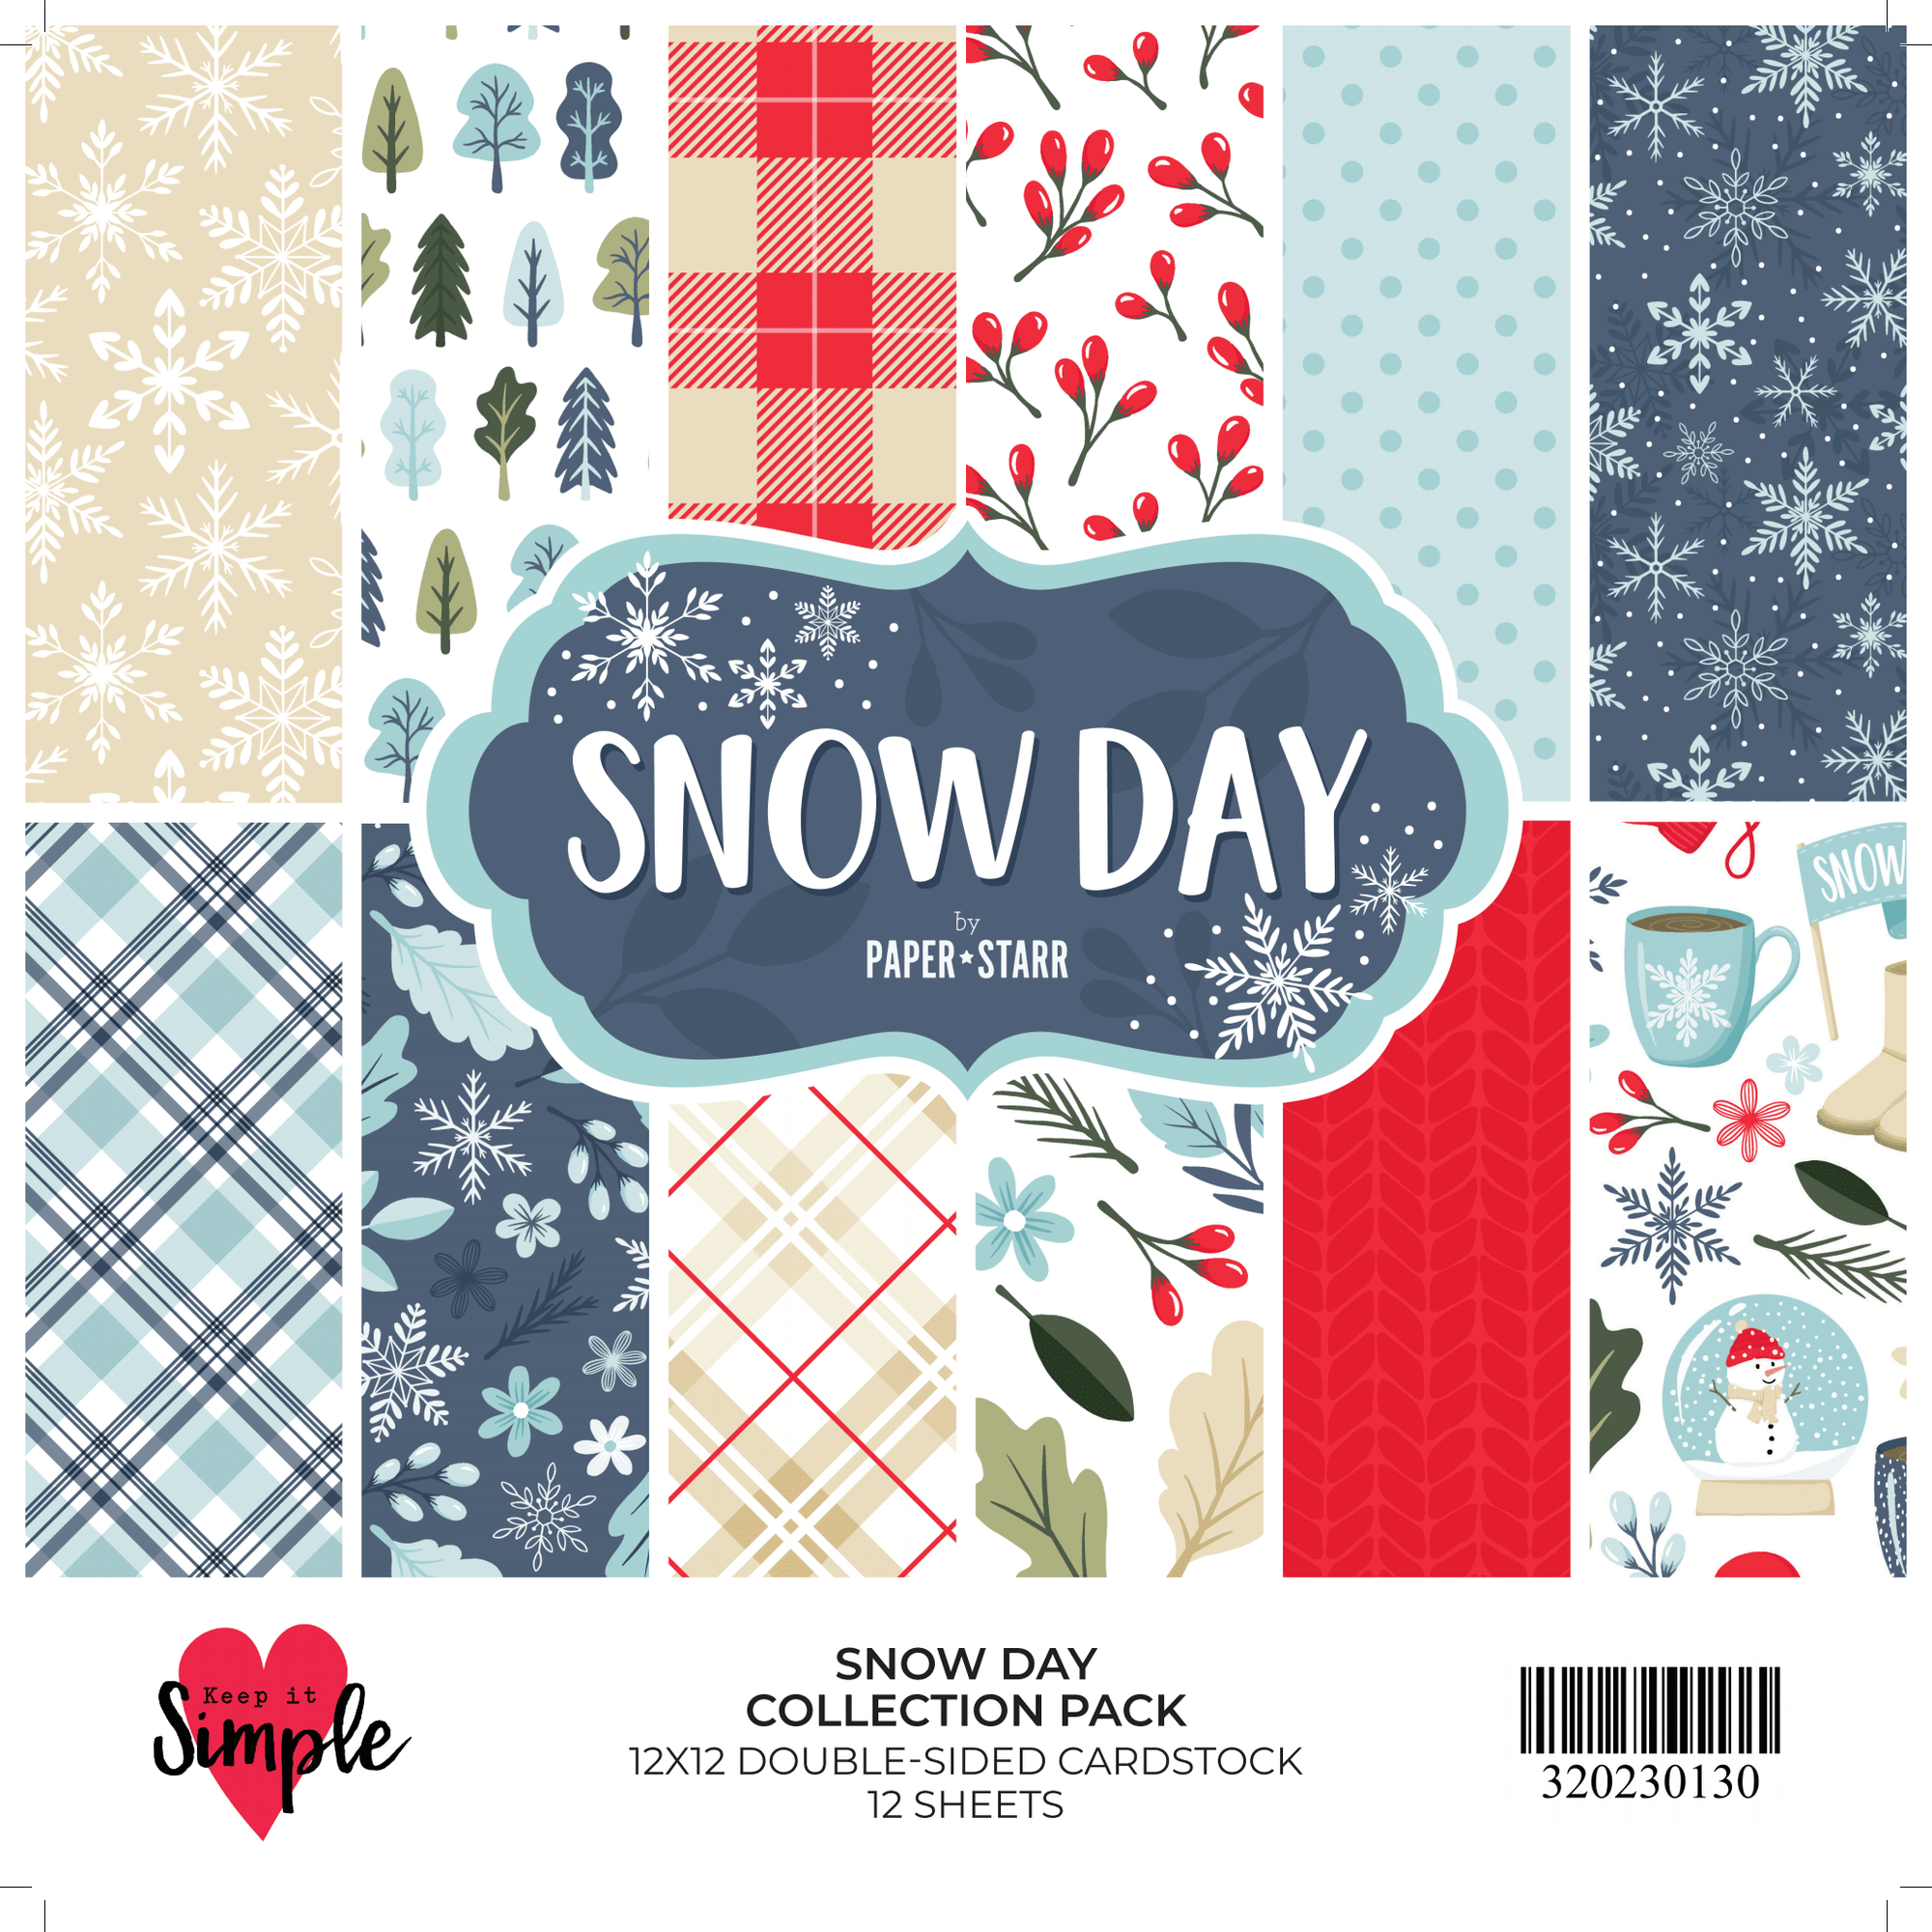 Snow Day - Collection Pack - 12x12